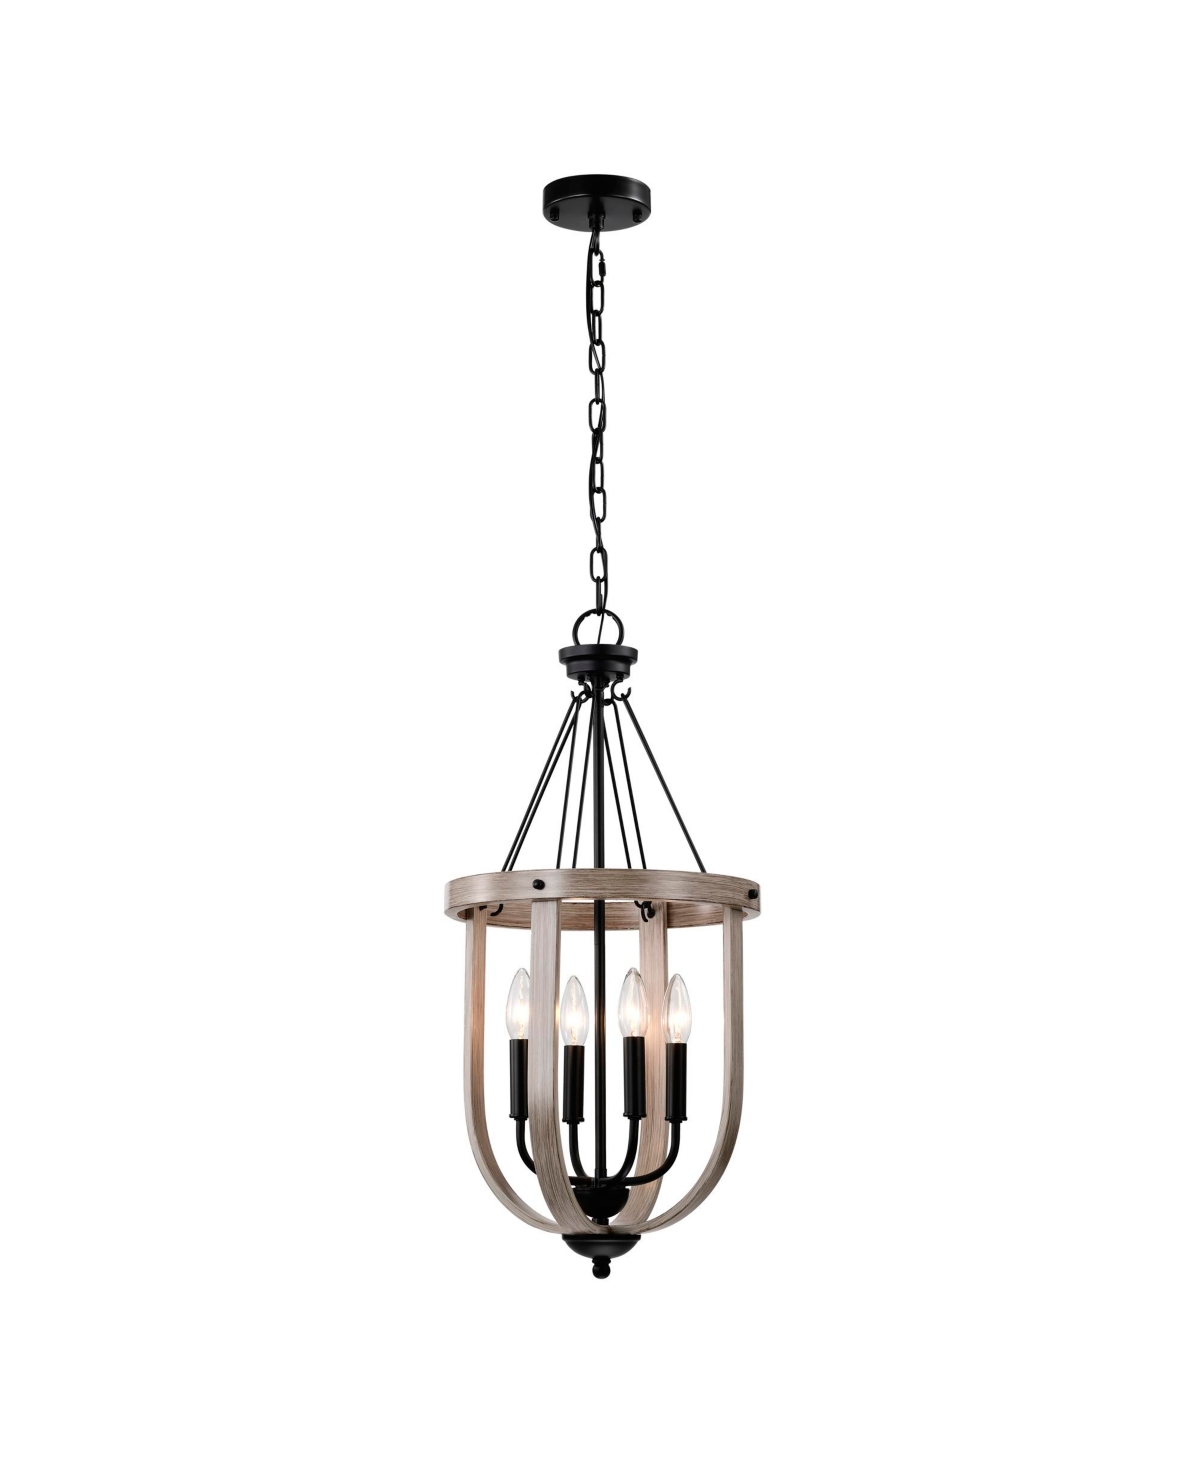 Home Accessories Giano 14" 4-light Indoor Finish Chandelier With Light Kit In Matte Black And Faux Wood Grain